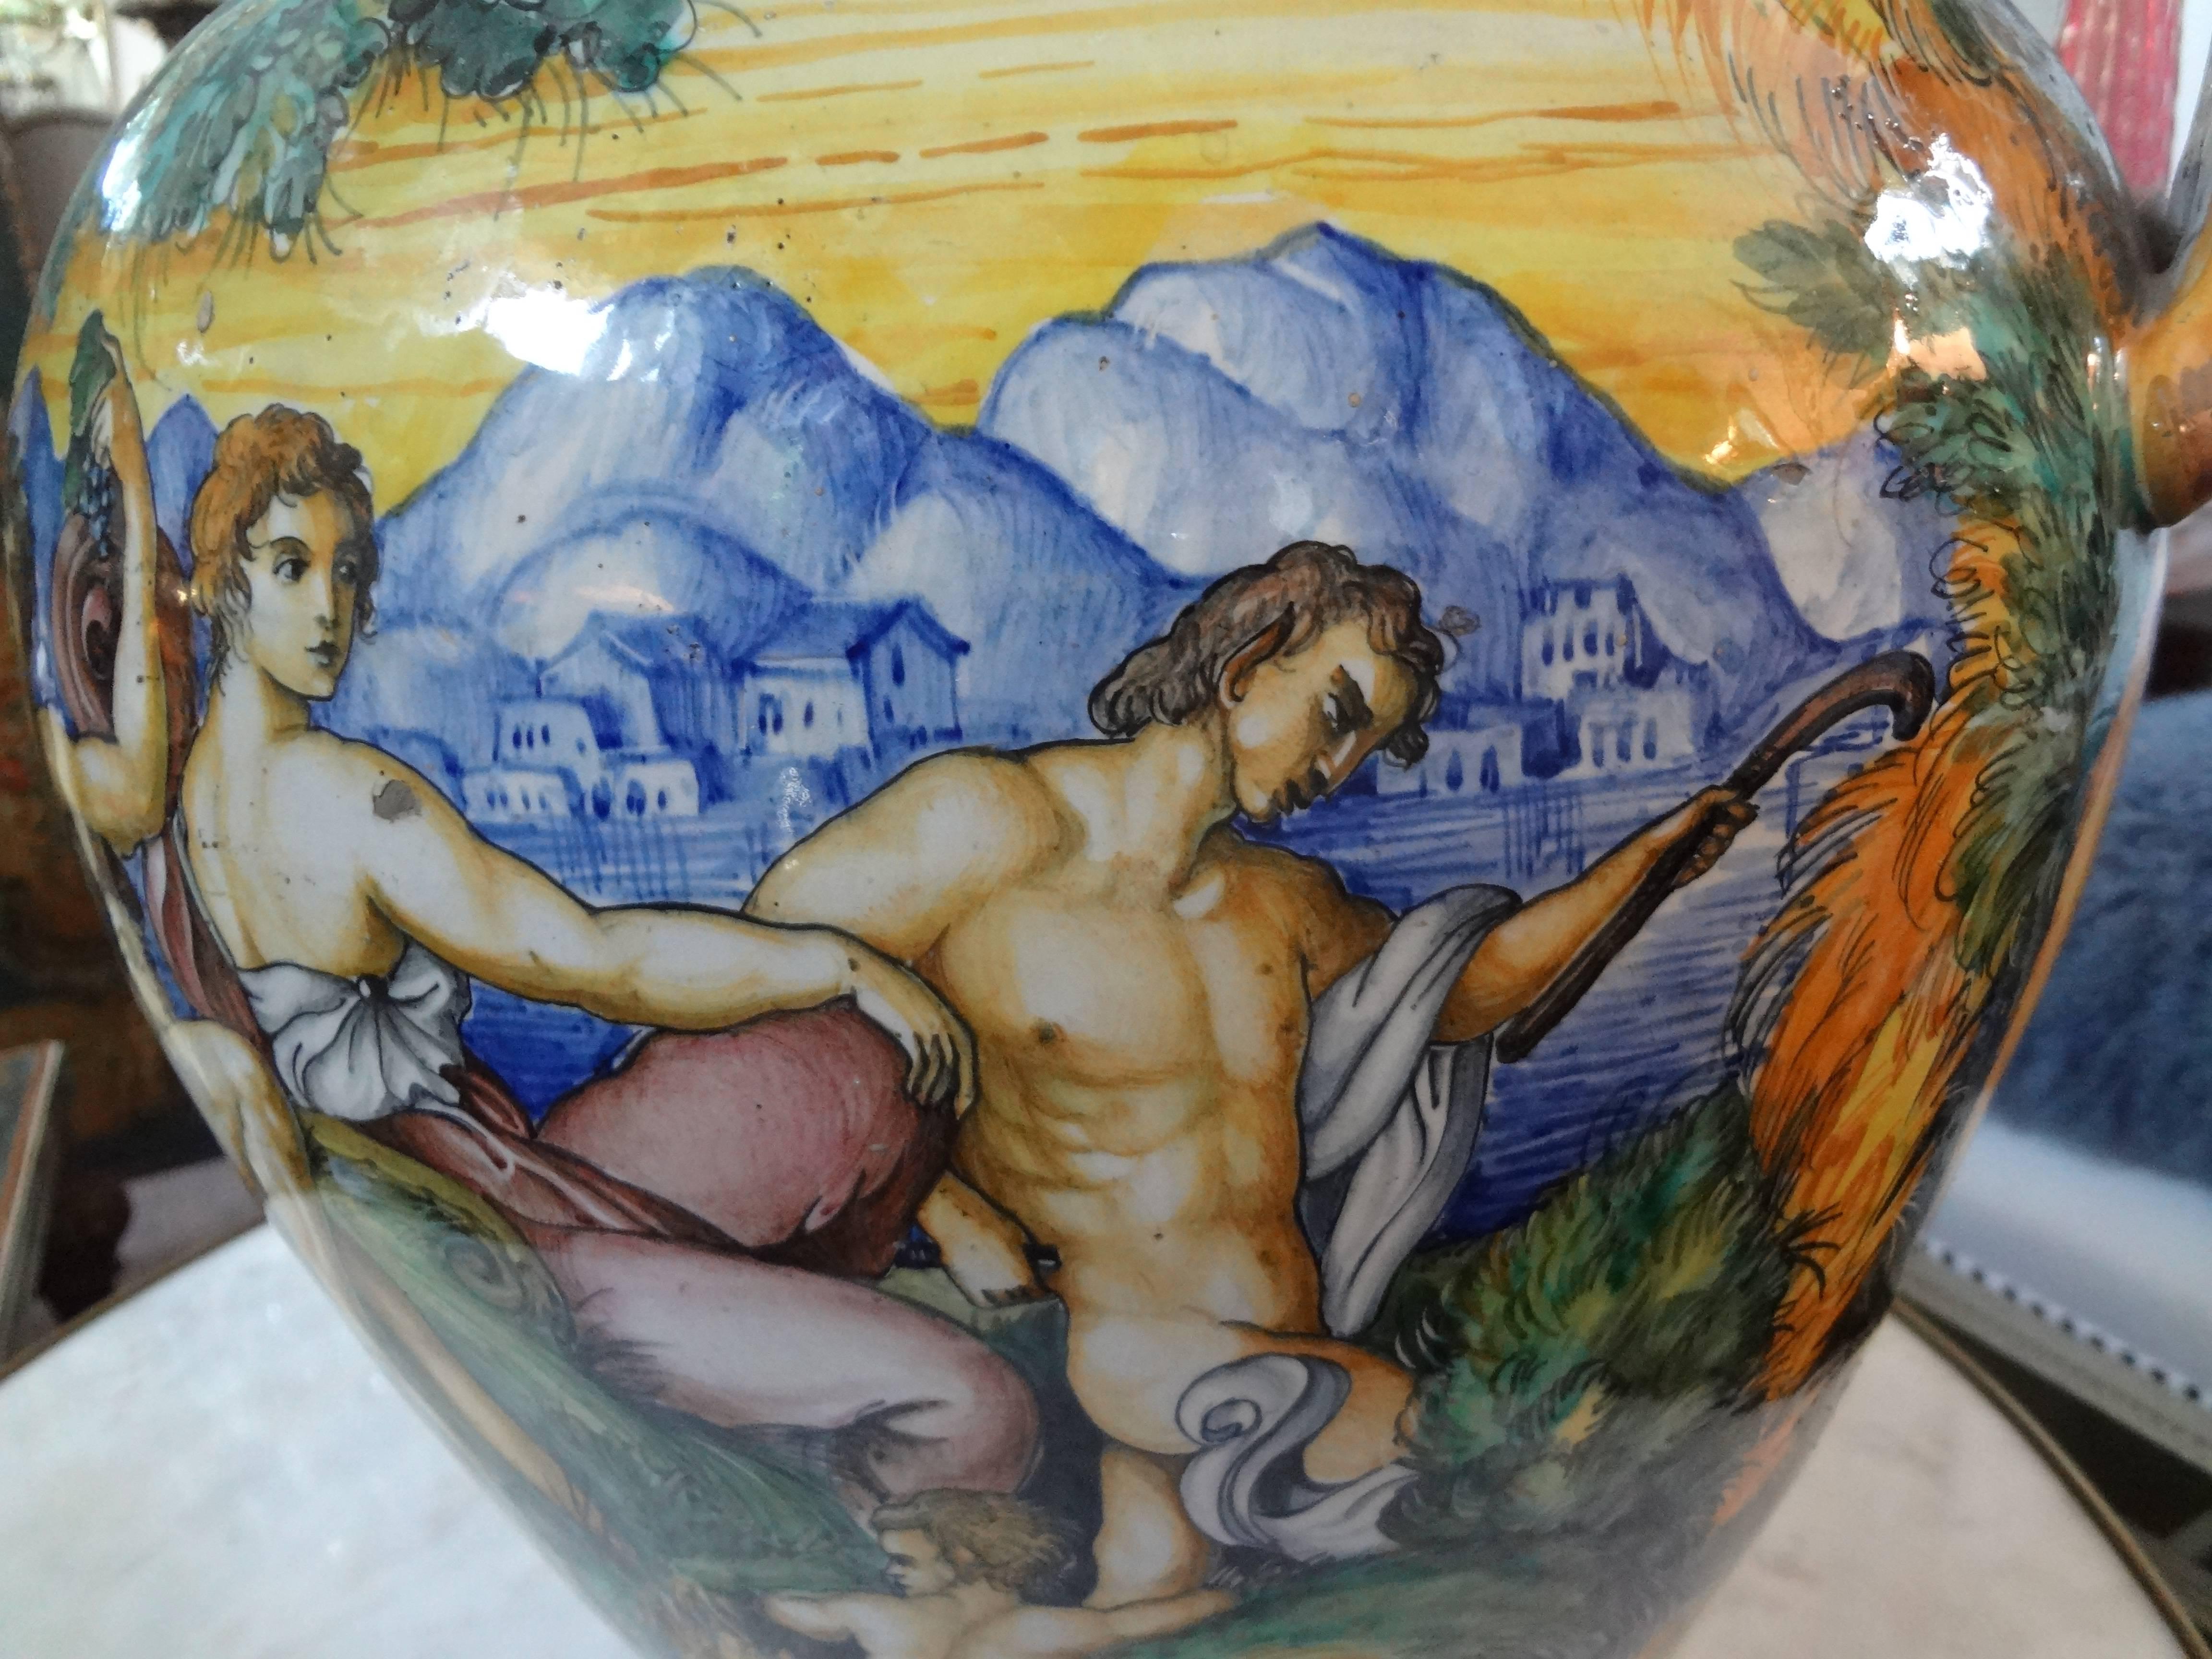 Beautifully hand decorated large Italian Maiolica or Majolica glazed earthenware urn or vessel with colorful mythological scenes attributed to Urbino Workshop. This piece dates to the mid-19th century. Some chips to the glaze on body of structure,